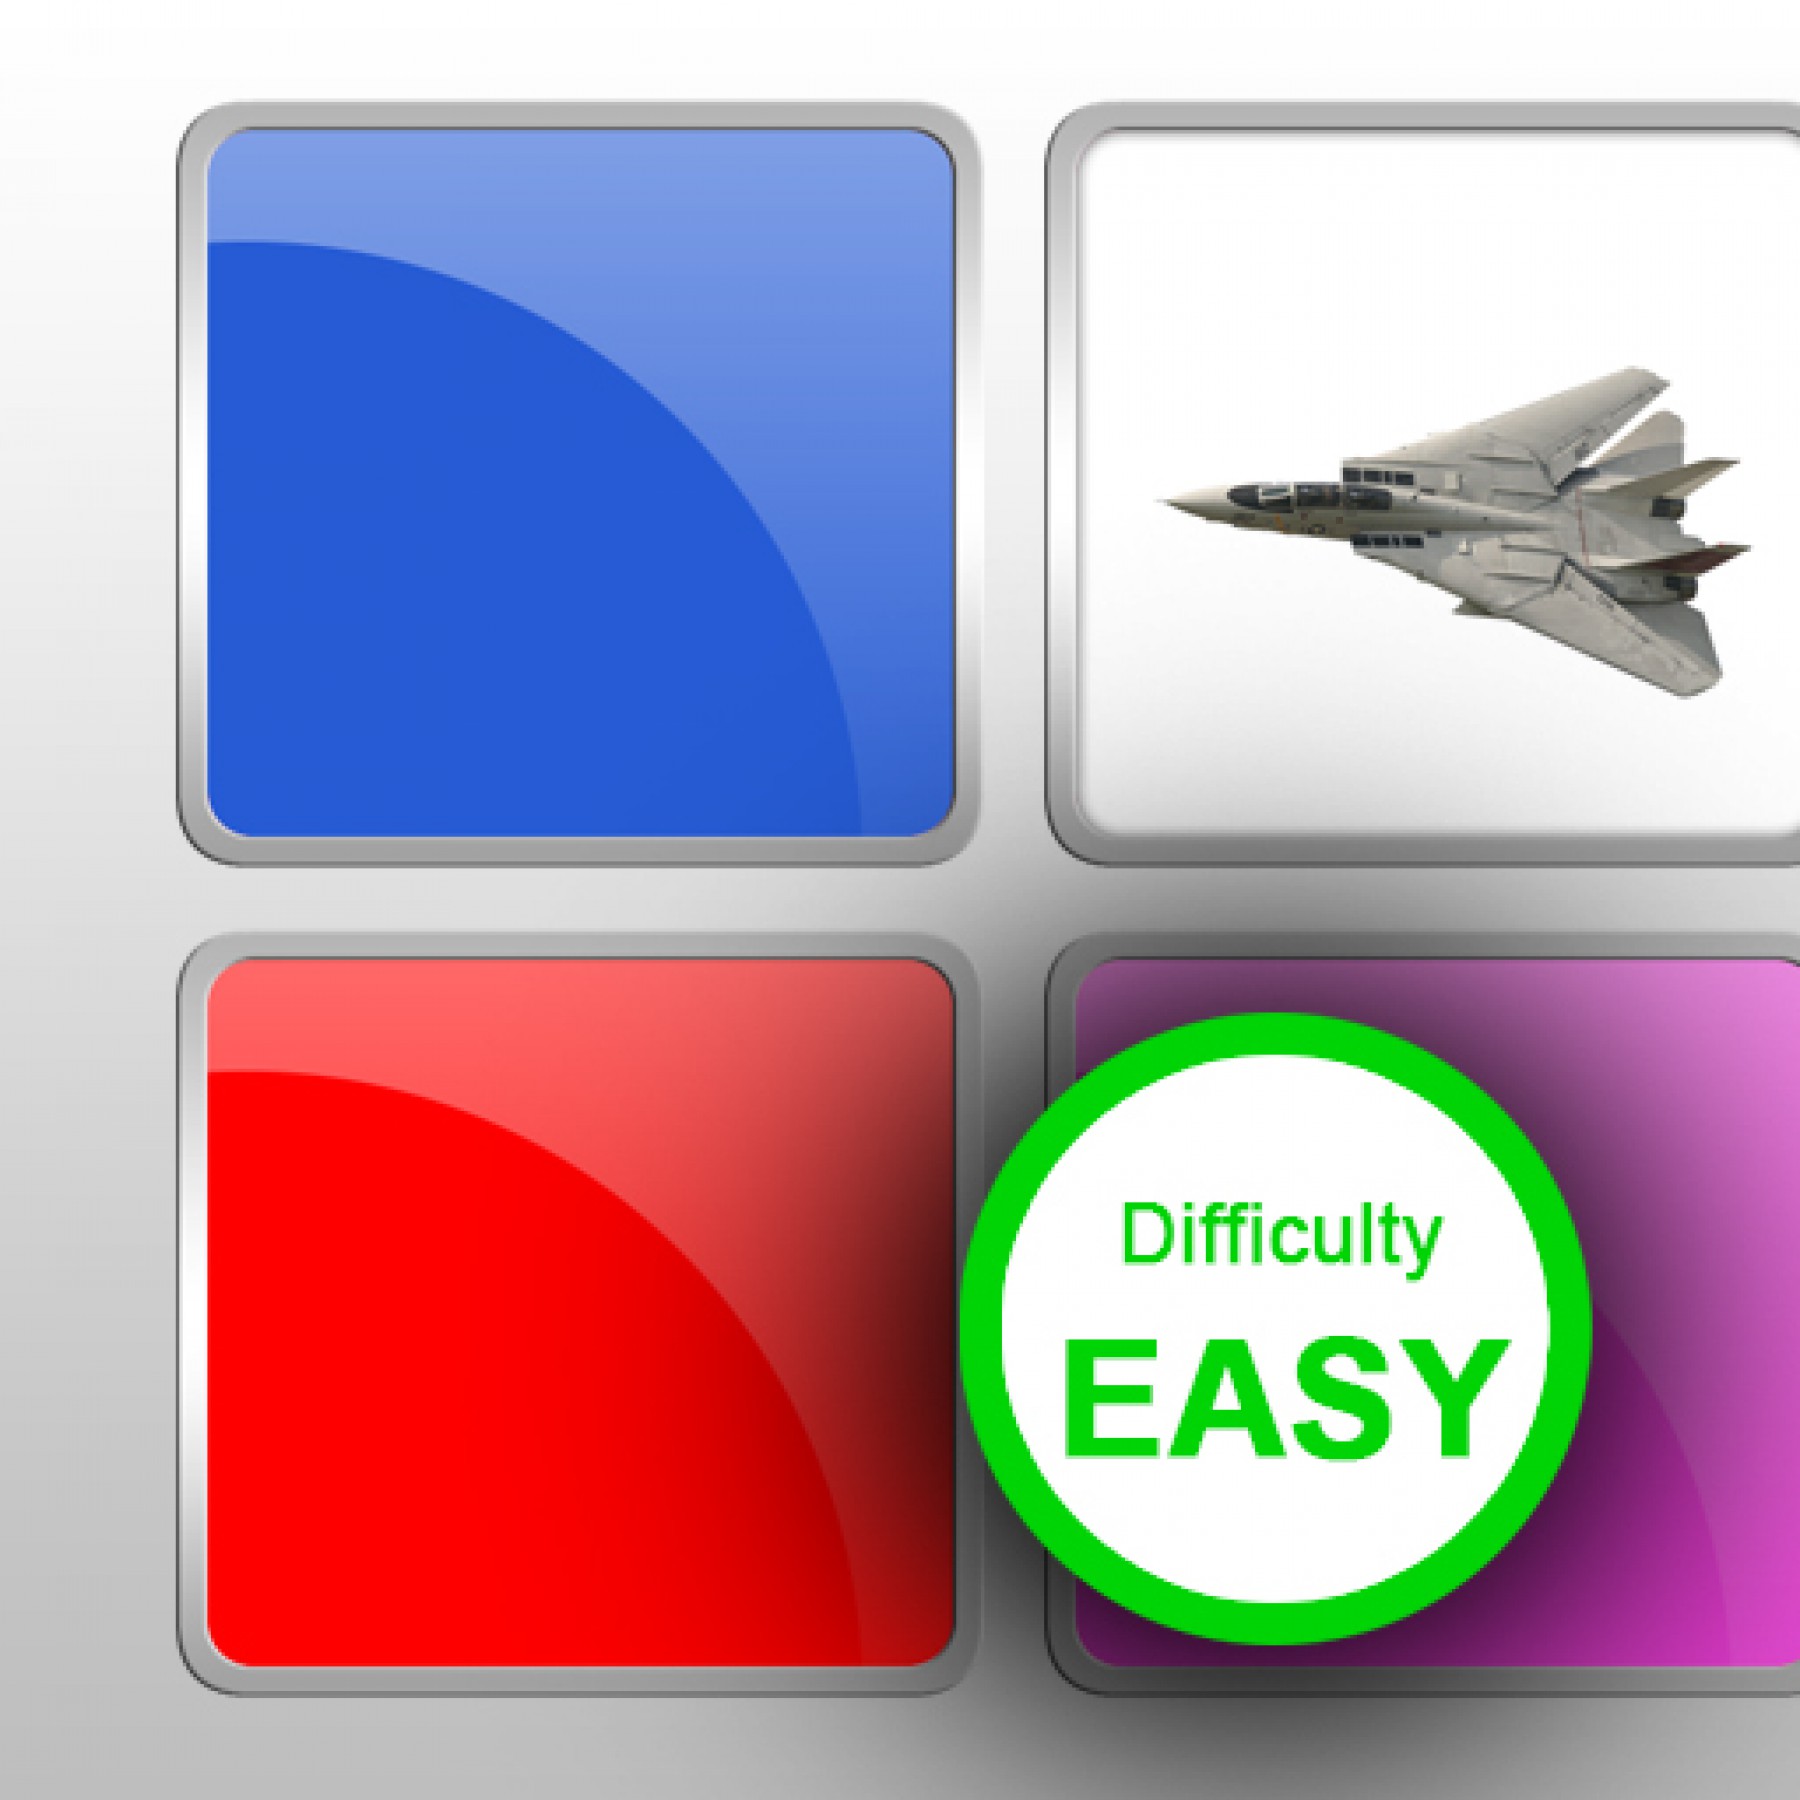 easy-planes-games-kids-adults-transport-main-location1